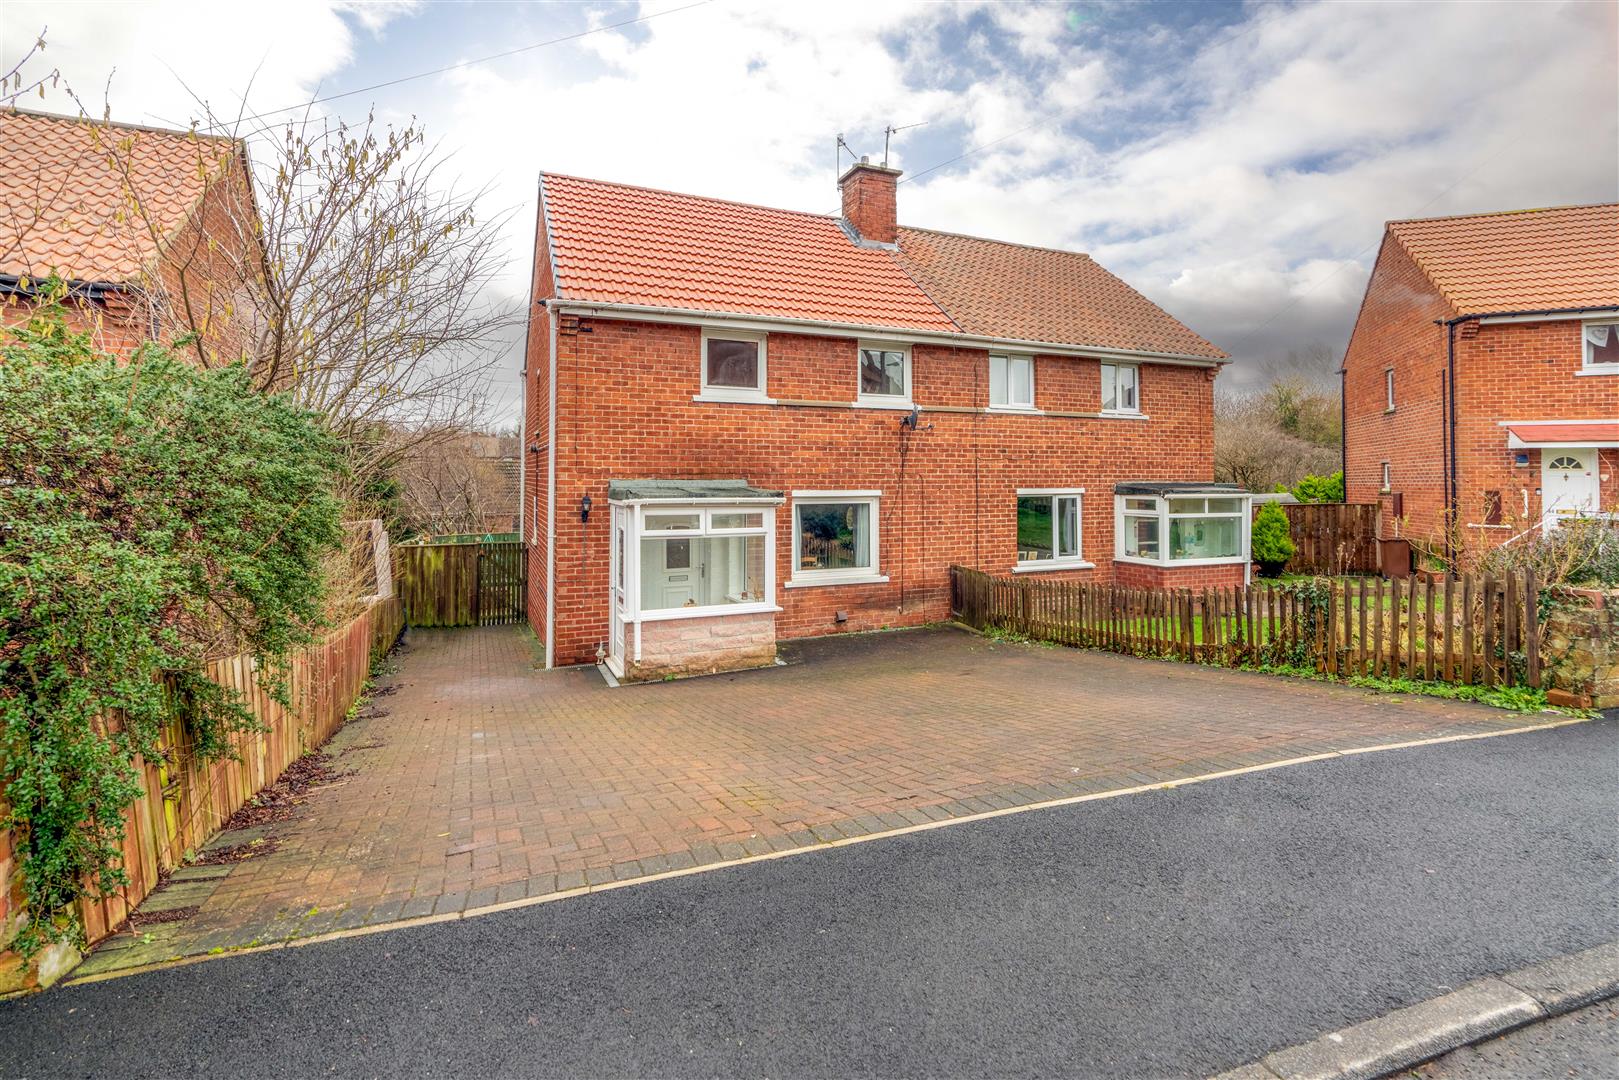 3 bed semi-detached house for sale in Postern Crescent, Morpeth - Property Image 1